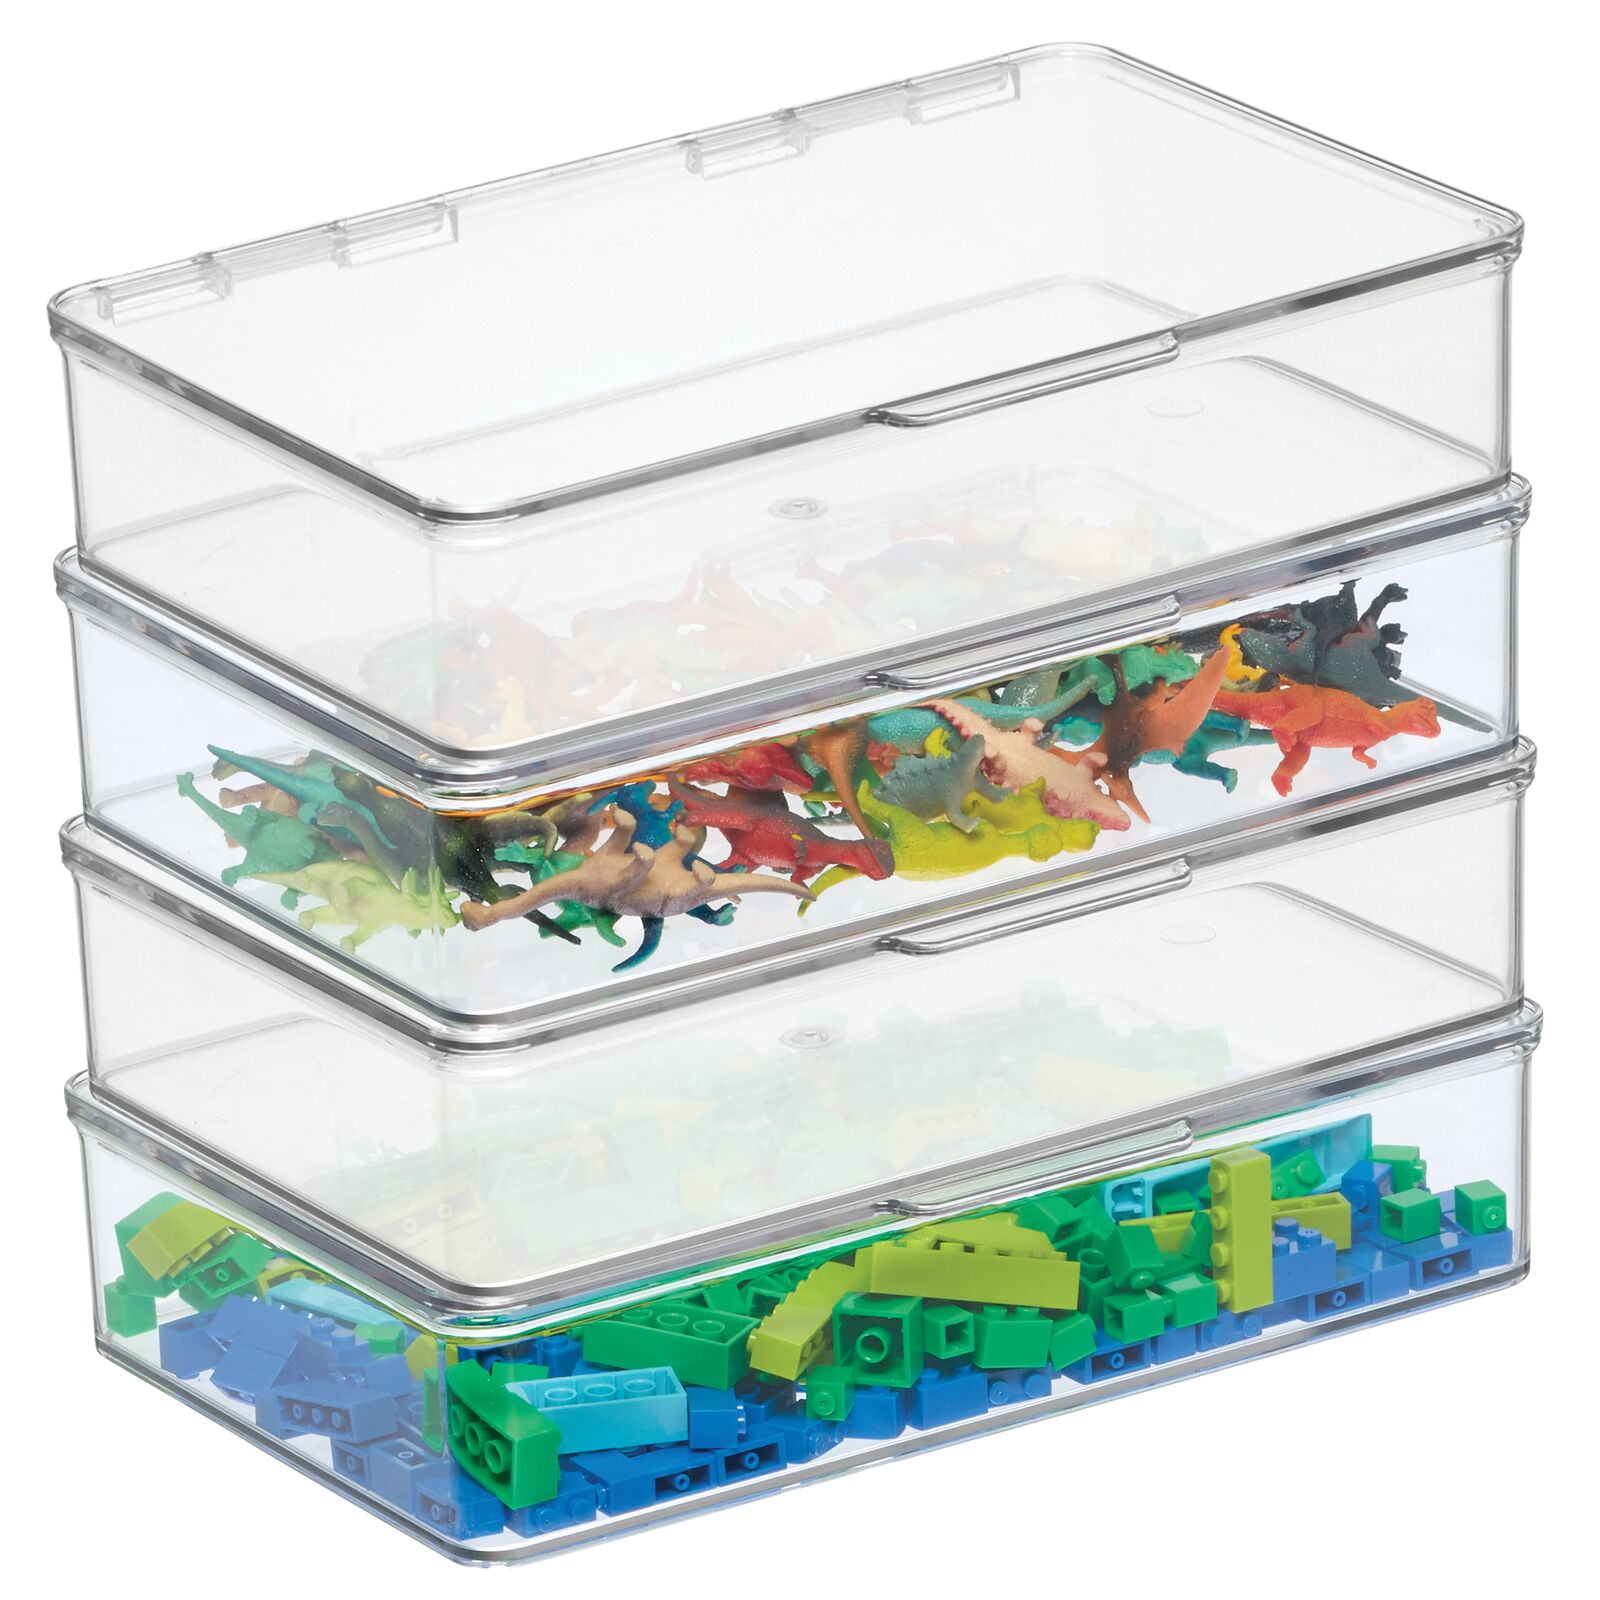 4ct mDesign Plastic Bath Stacking Storage Organizer Box, Hinged Lid, 4 Pack, Clear